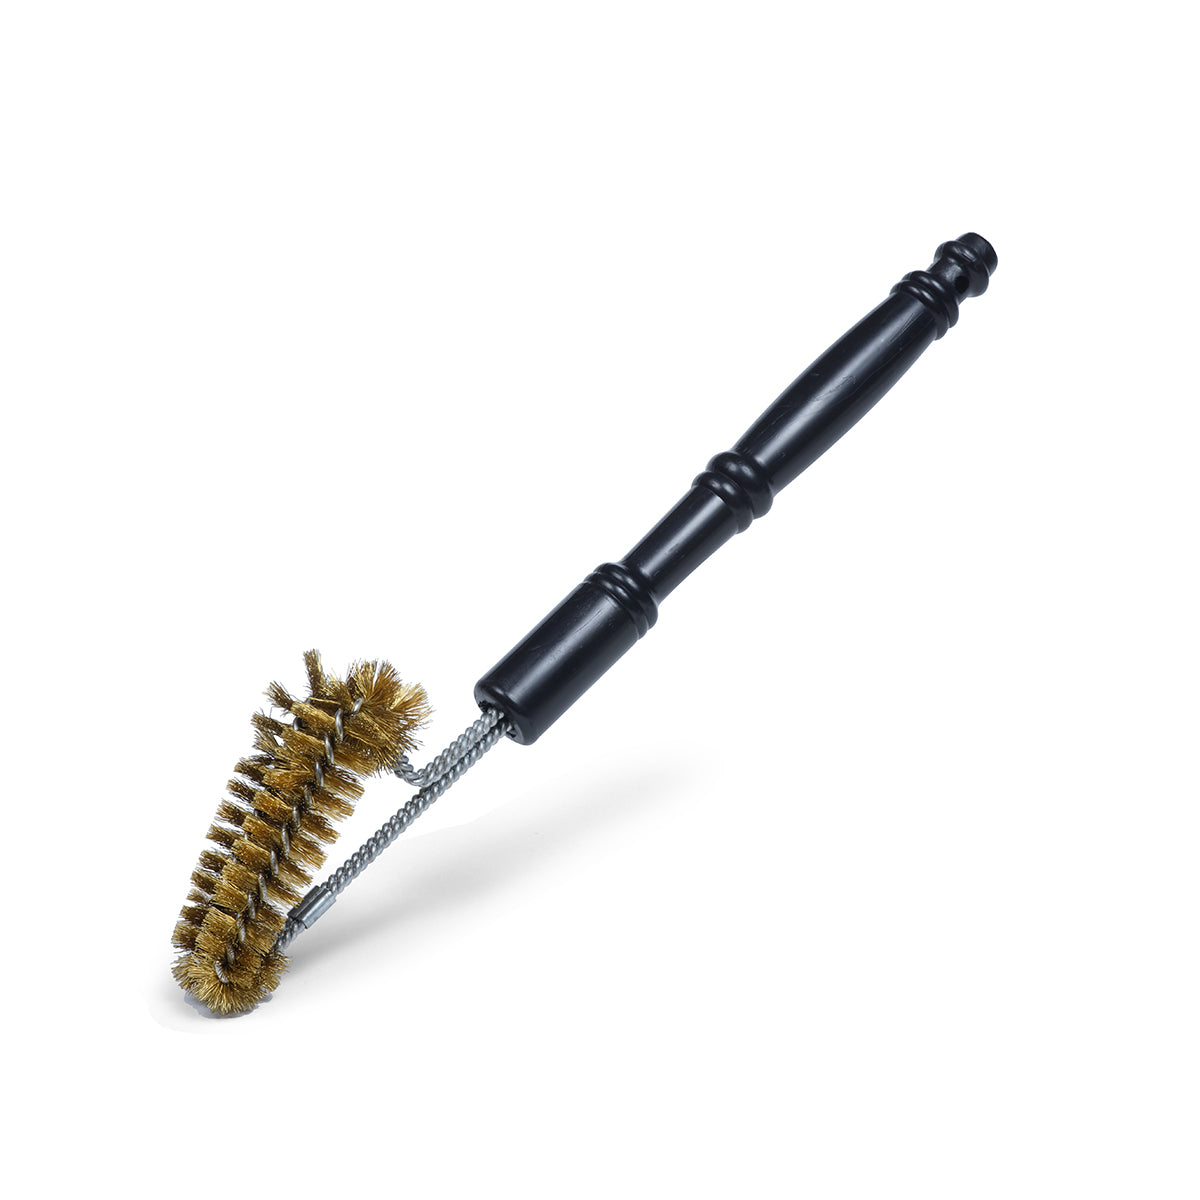 Buy Brushtech 16-Inch Heavy Duty BBQ Grill Cleaning Brush